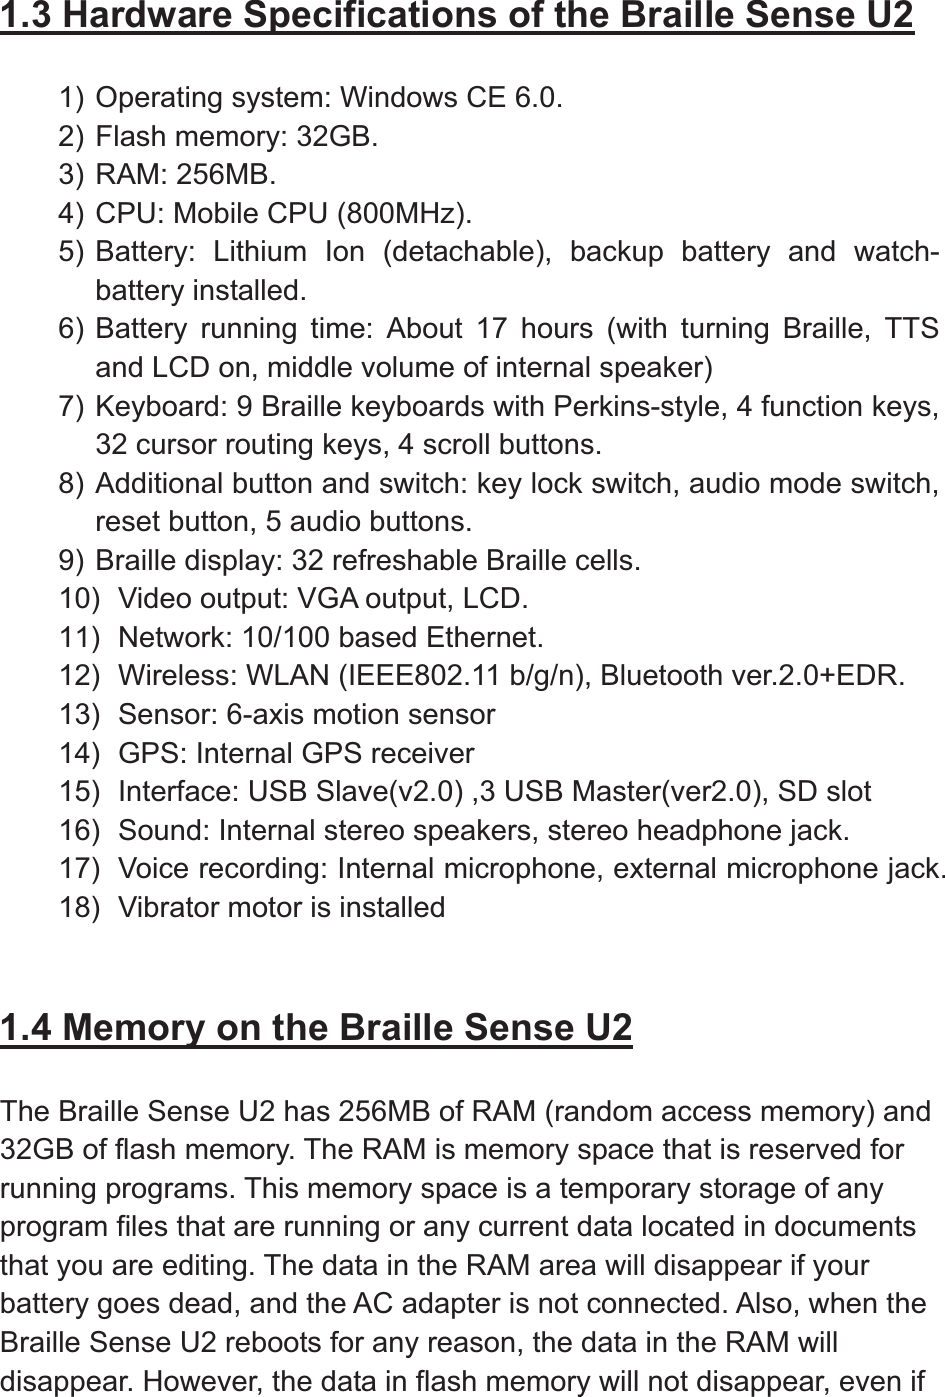 1.3 Hardware Specifications of the Braille Sense U21) Operating system: Windows CE 6.0. 2) Flash memory: 32GB. 3) RAM: 256MB. 4) CPU: Mobile CPU (800MHz).   5) Battery: Lithium Ion (detachable), backup battery and watch-battery installed. 6) Battery running time: About 17 hours (with turning Braille, TTS and LCD on, middle volume of internal speaker) 7) Keyboard: 9 Braille keyboards with Perkins-style, 4 function keys, 32 cursor routing keys, 4 scroll buttons. 8) Additional button and switch: key lock switch, audio mode switch, reset button, 5 audio buttons. 9) Braille display: 32 refreshable Braille cells. 10)  Video output: VGA output, LCD. 11)  Network: 10/100 based Ethernet. 12)  Wireless: WLAN (IEEE802.11 b/g/n), Bluetooth ver.2.0+EDR. 13)  Sensor: 6-axis motion sensor 14)  GPS: Internal GPS receiver 15)  Interface: USB Slave(v2.0) ,3 USB Master(ver2.0), SD slot 16)  Sound: Internal stereo speakers, stereo headphone jack. 17)  Voice recording: Internal microphone, external microphone jack. 18)  Vibrator motor is installed 1.4 Memory on the Braille Sense U2The Braille Sense U2 has 256MB of RAM (random access memory) and 32GB of flash memory. The RAM is memory space that is reserved for running programs. This memory space is a temporary storage of any program files that are running or any current data located in documents that you are editing. The data in the RAM area will disappear if your battery goes dead, and the AC adapter is not connected. Also, when the Braille Sense U2 reboots for any reason, the data in the RAM will disappear. However, the data in flash memory will not disappear, even if 